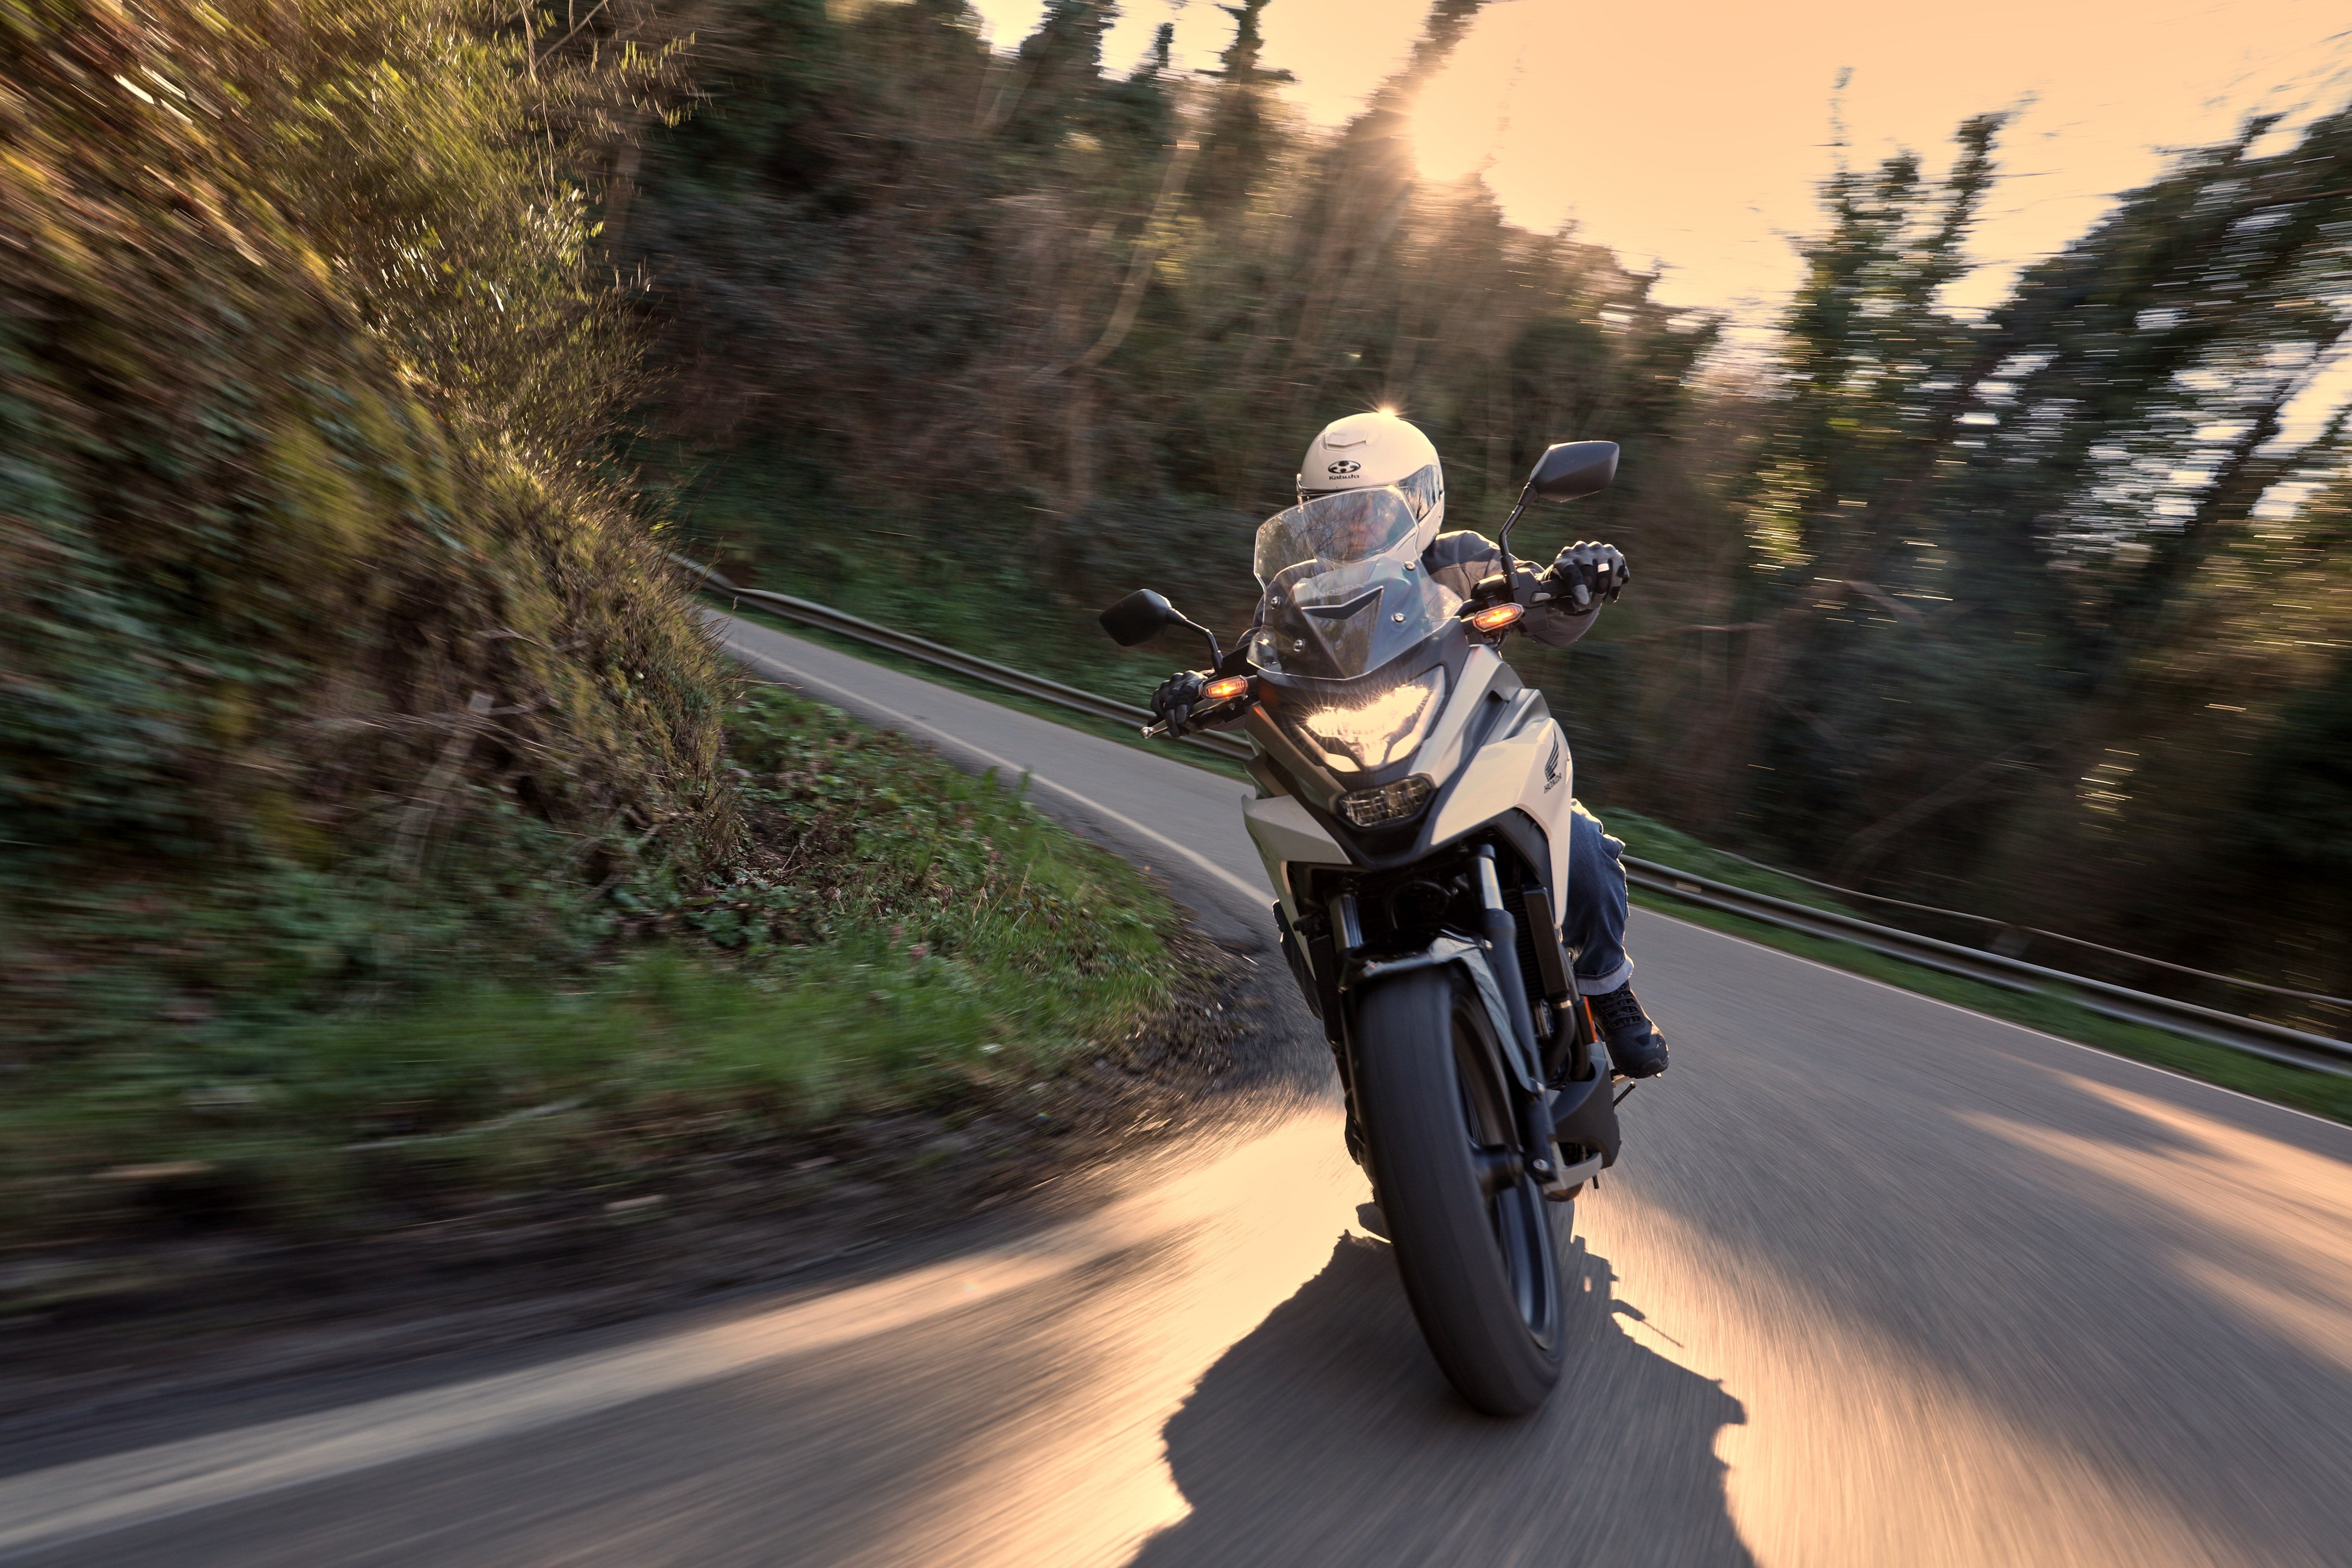 CBT Bike Test Bournemouth | Motorcycle Training Bournemouth | Honda Discounts | Motorcycle Training Poole and Dorset